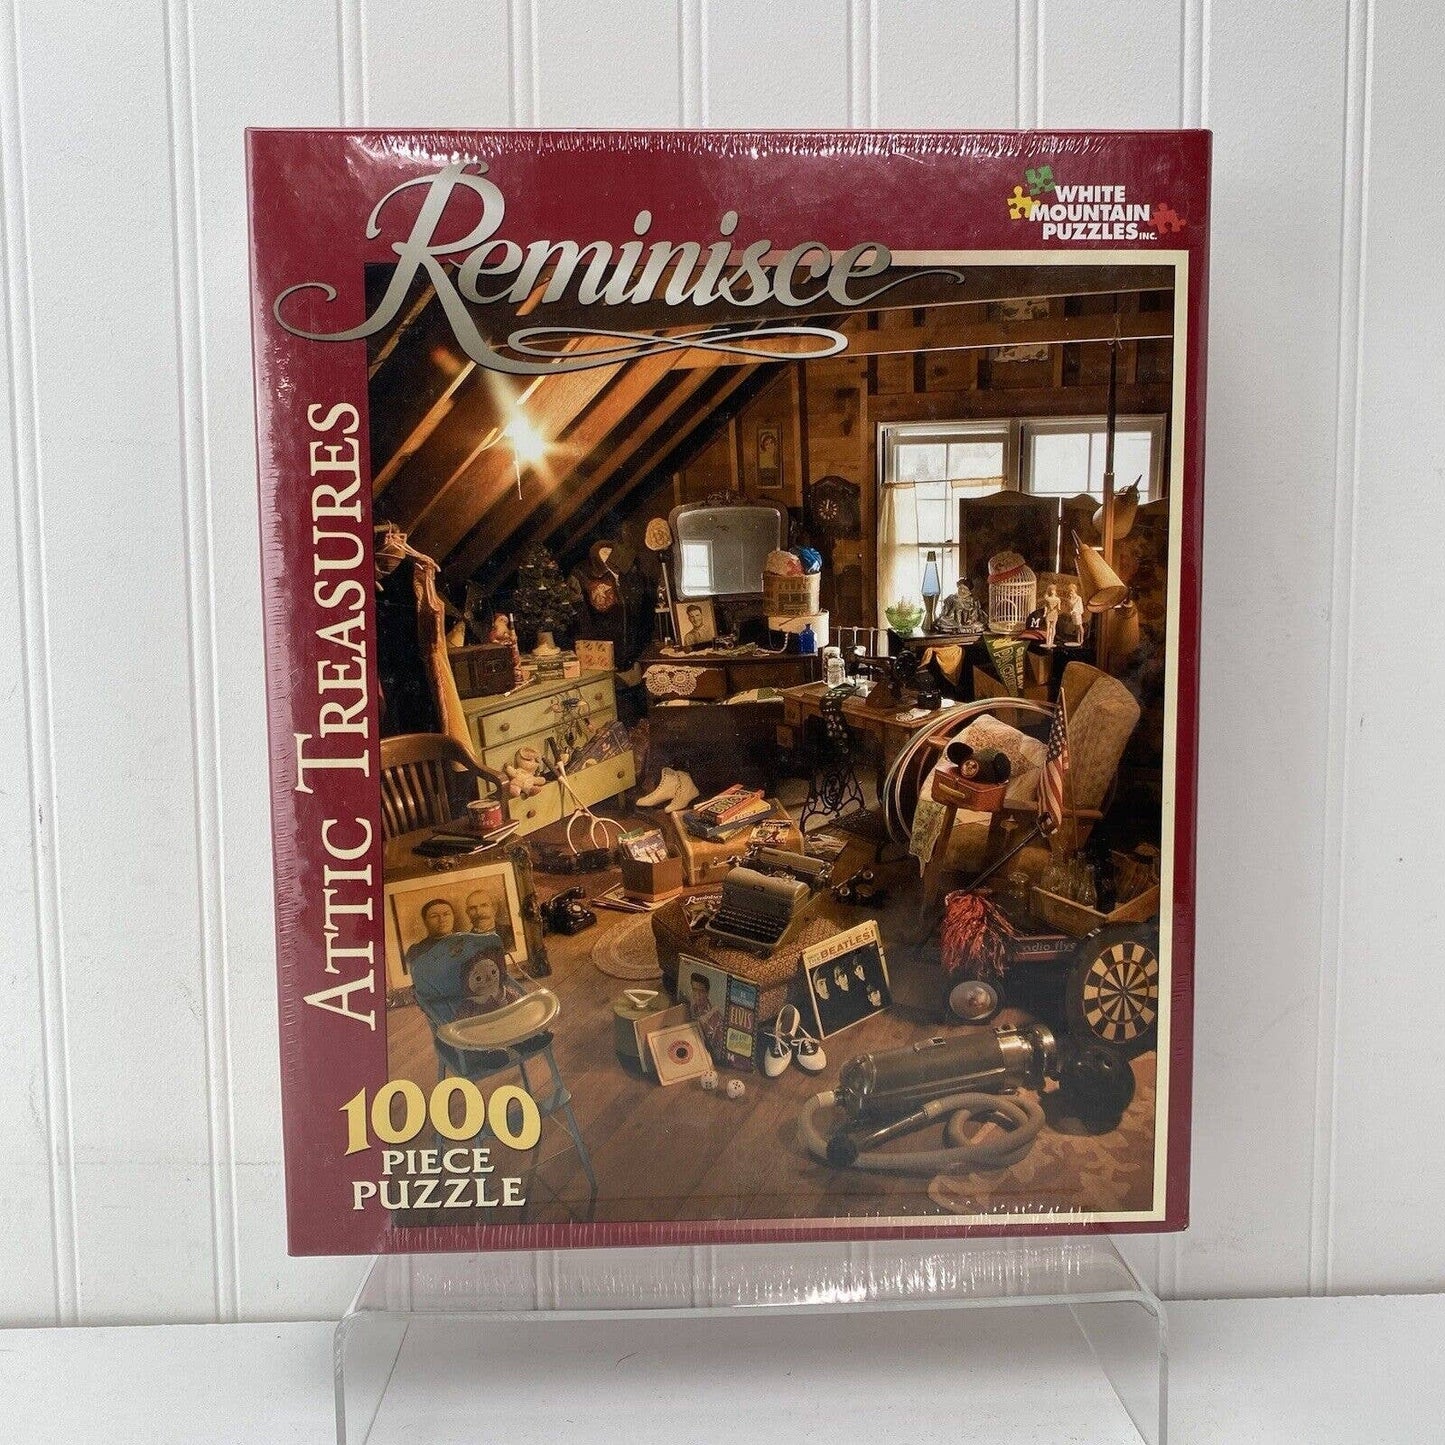 Lot of 2 White Mountain 1000 Piece Puzzles - “Attic Treasures” & “Angel Kisses”